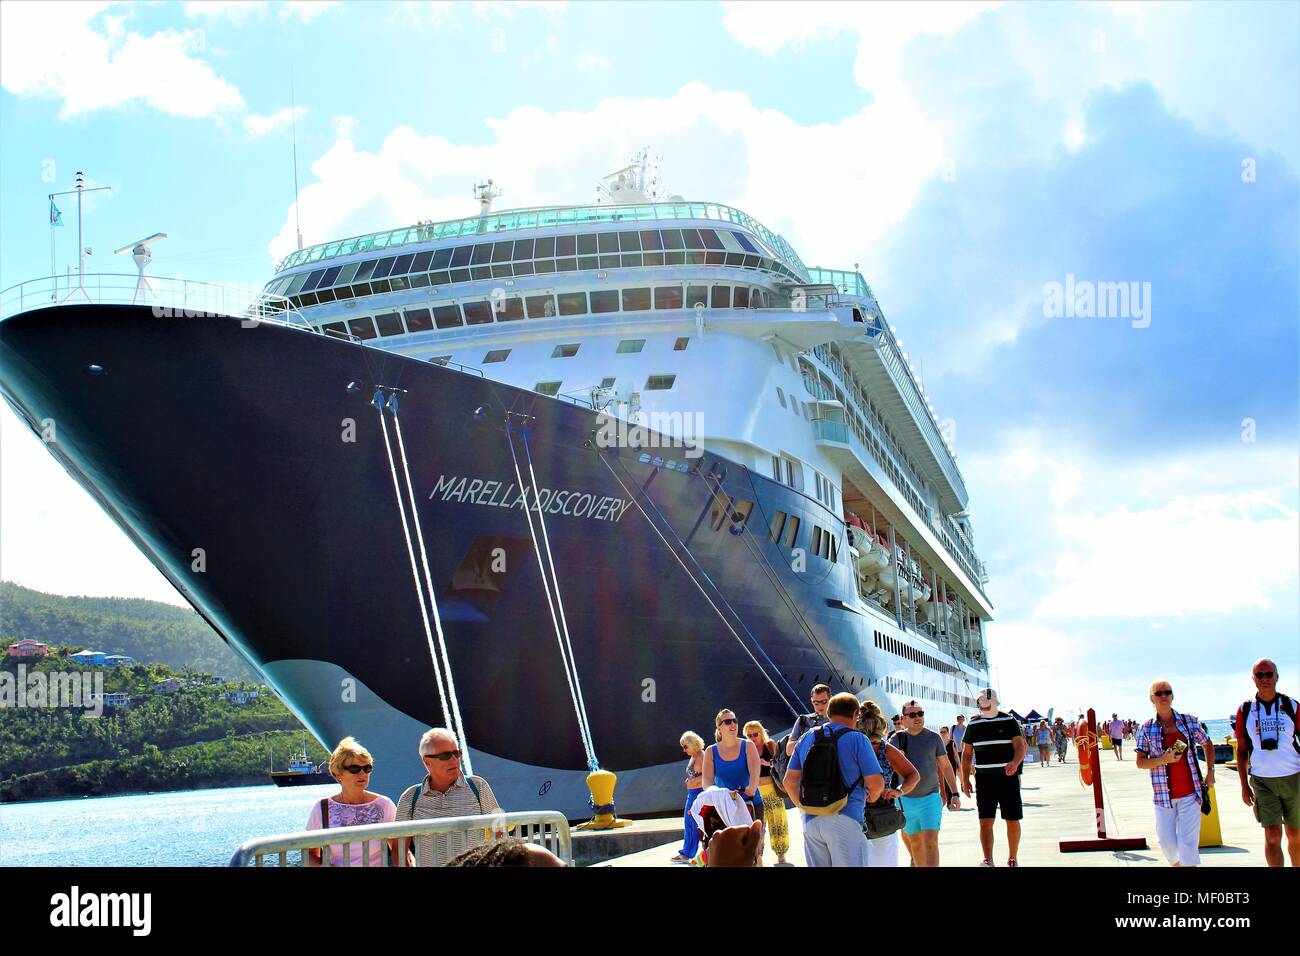 The Marella Discovery (TUI - formerly Thomson) cruise ship docked in Road Town port on the island of Tortola, British Virgin Islands, February 2018. Stock Photo